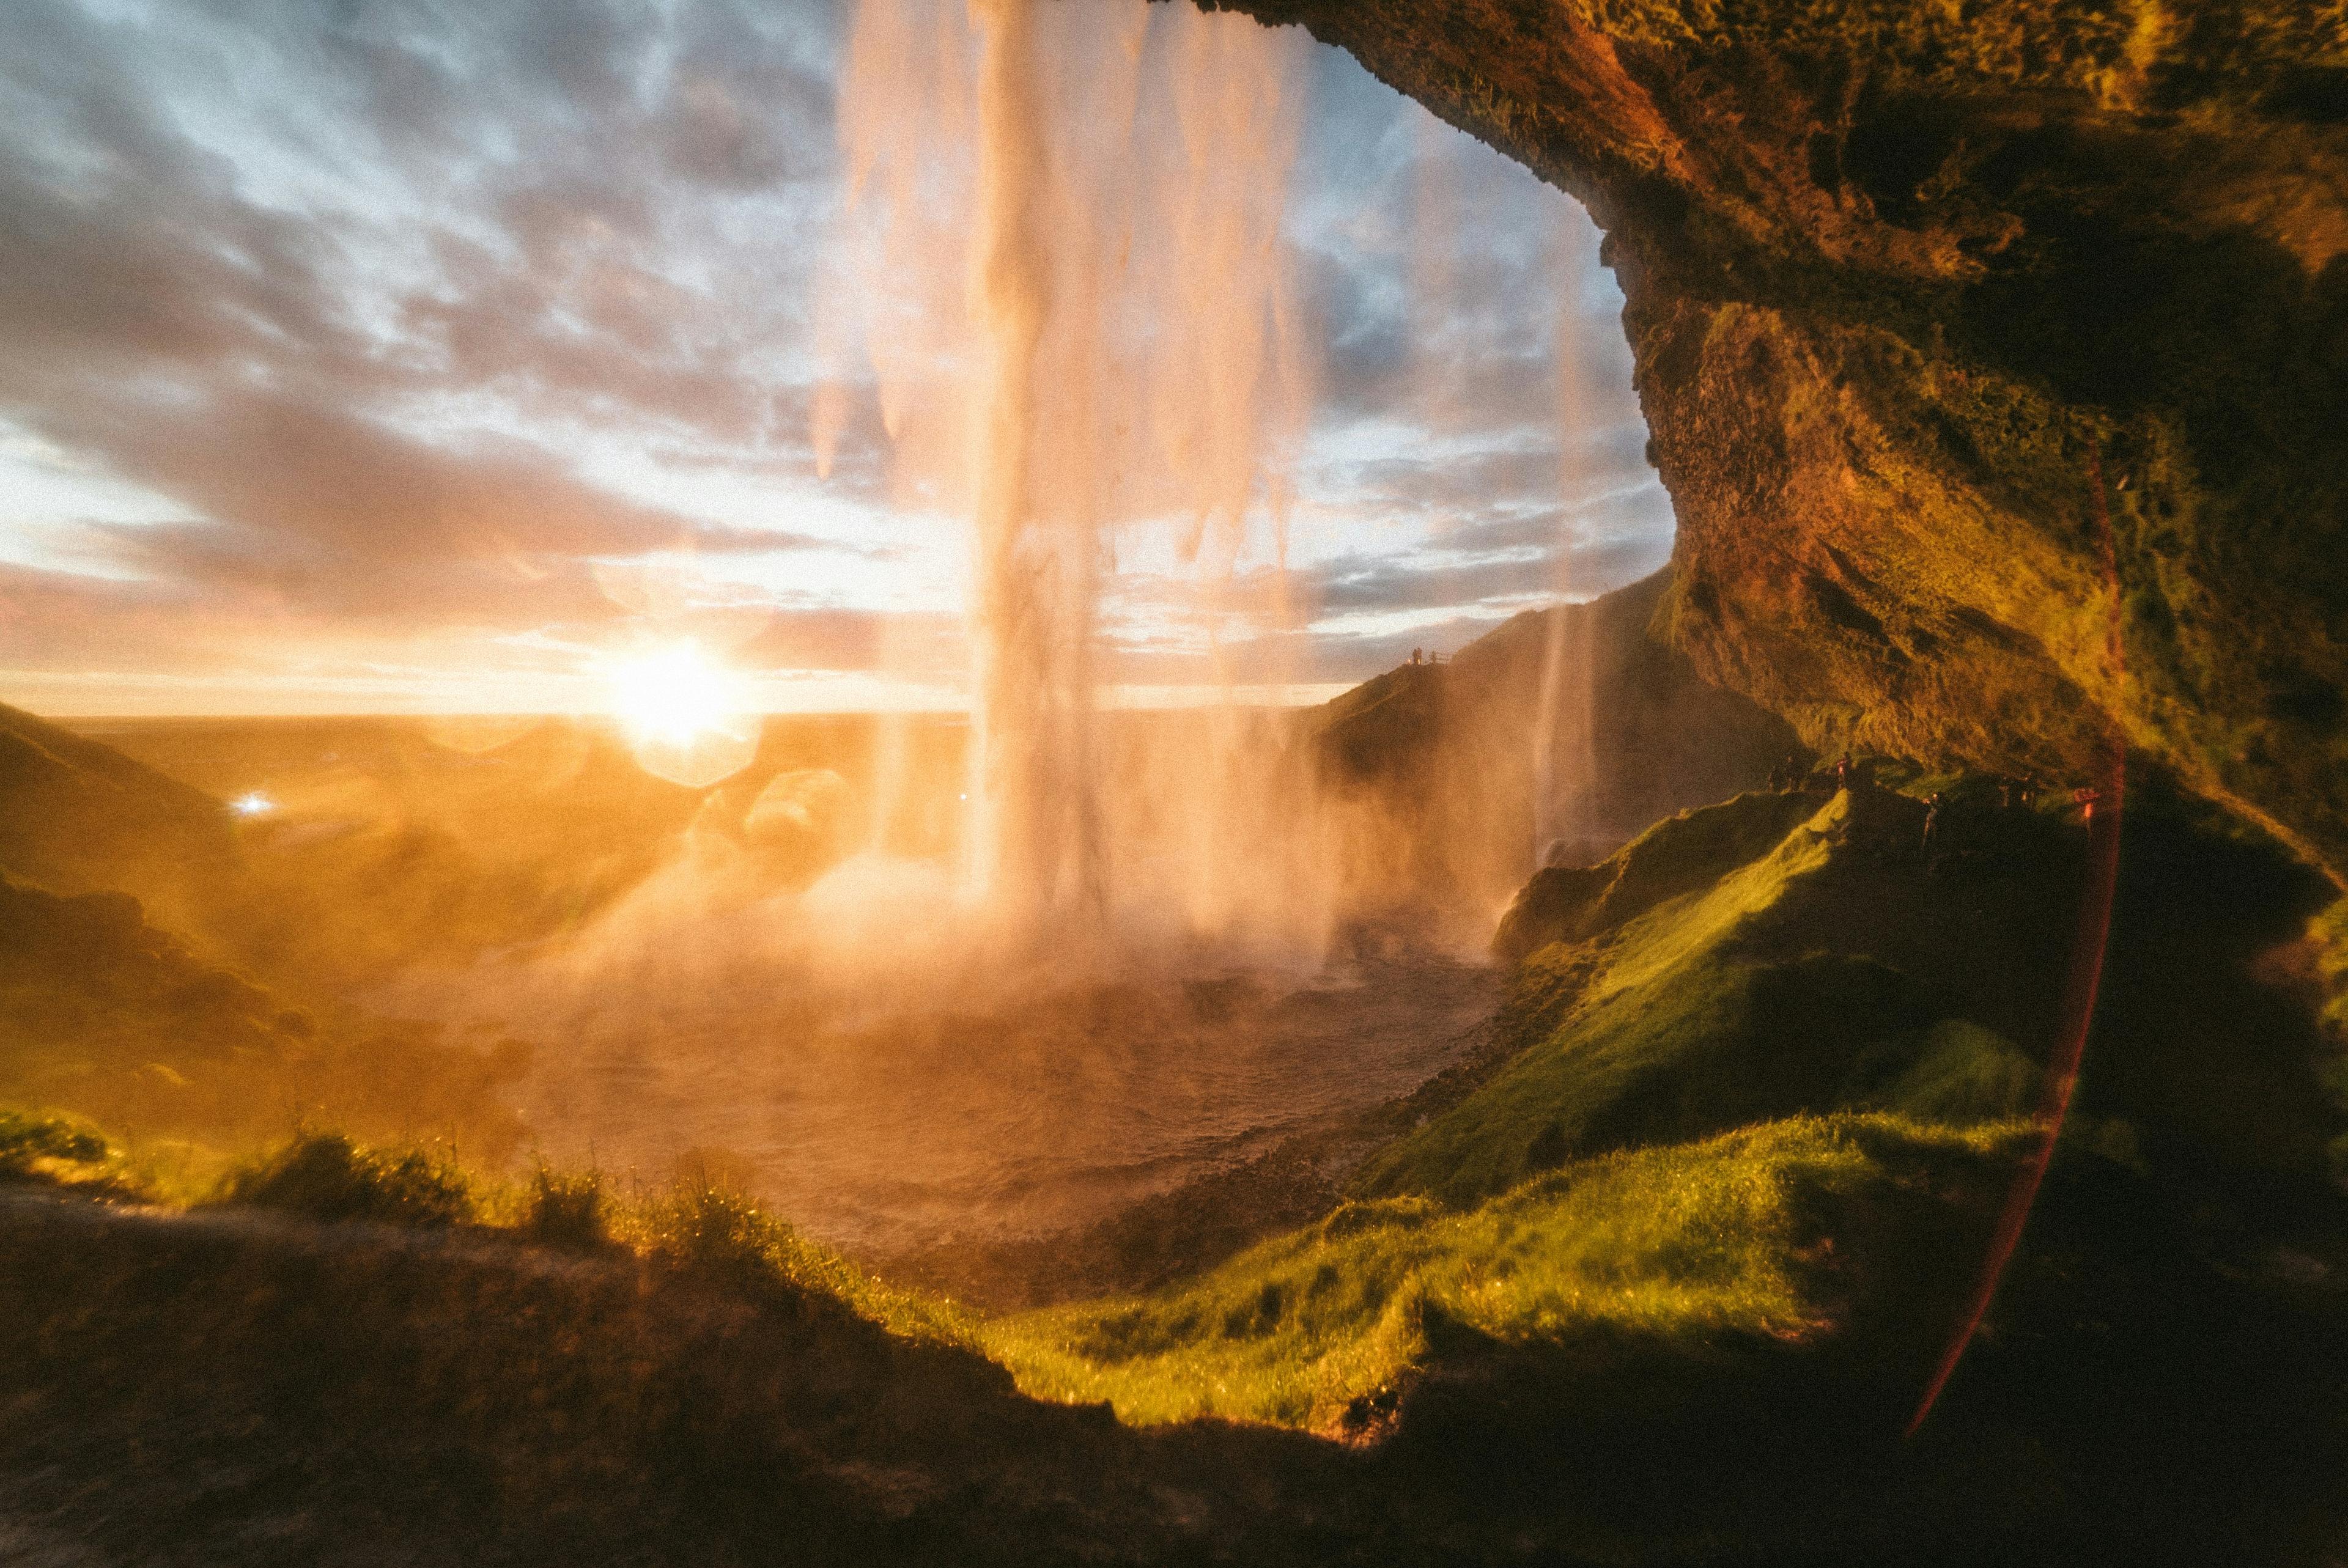 Sunset view behind a waterfall with rays of light piercing through the mist, as seen from a cave with moss-covered walls.